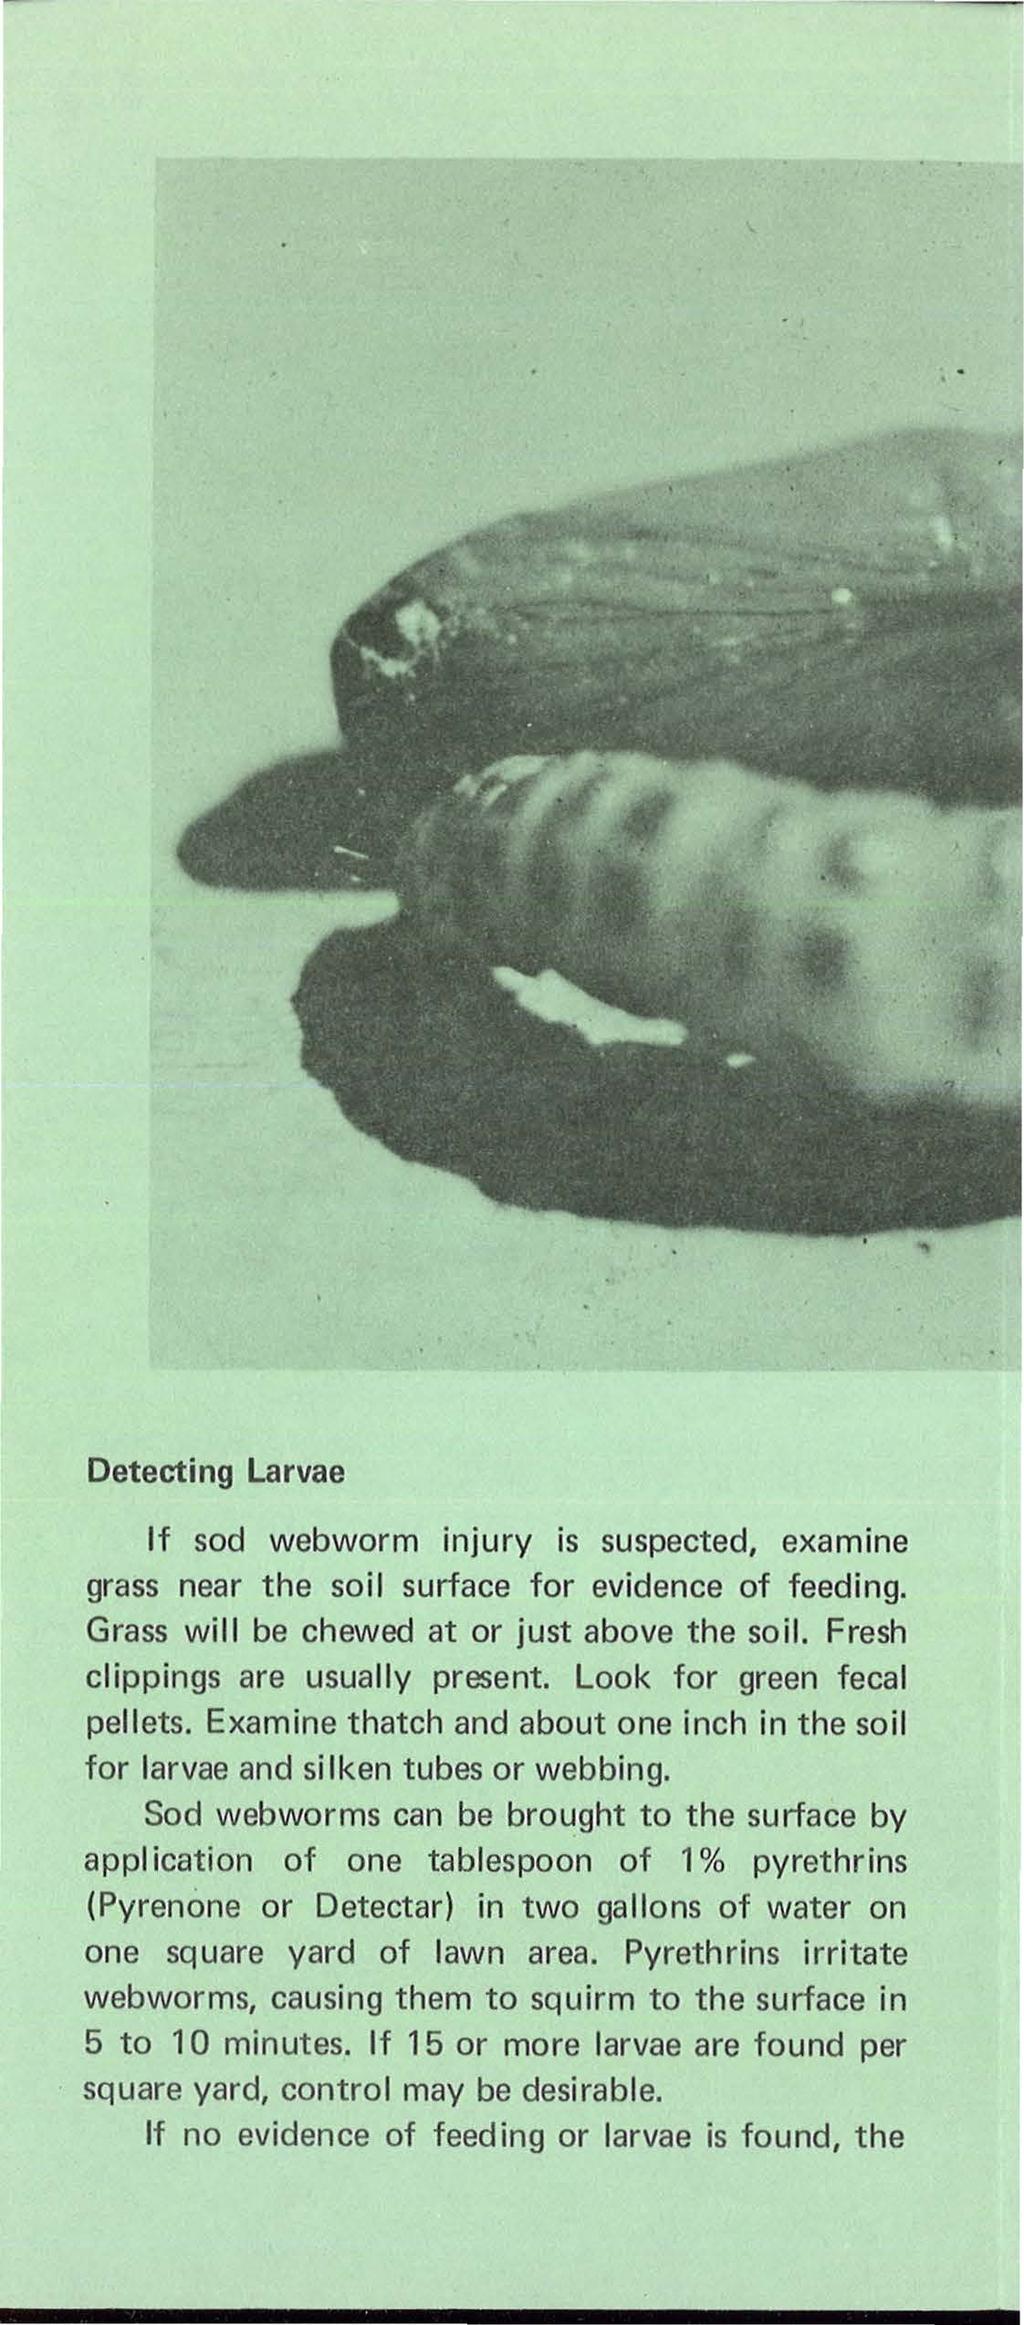 Detecting Larvae If sod webworm injury is suspected, examine grass near the soil surface for evidence of feeding. Grass will be chewed at or just above the soil. Fresh clippings are usually present.